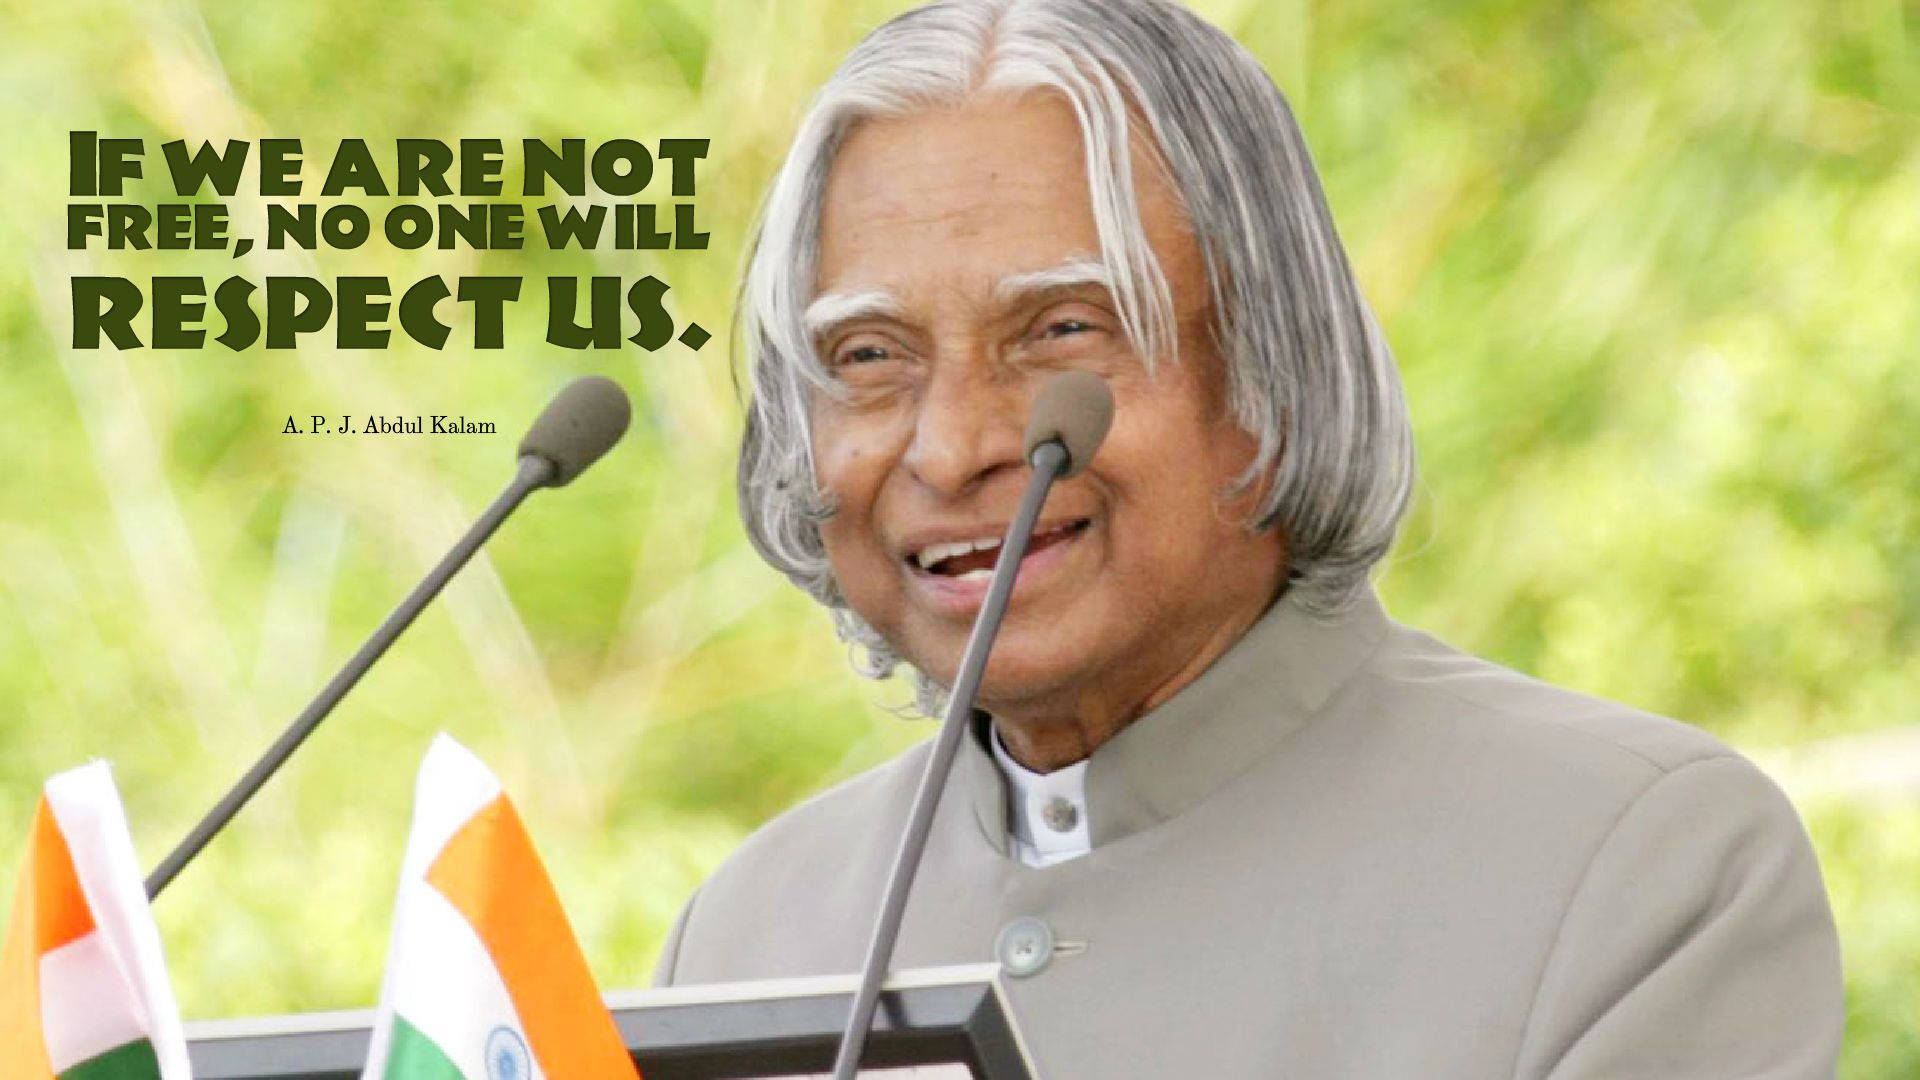 Abdul Kalam HD Freedom And Respect Quote Wallpaper